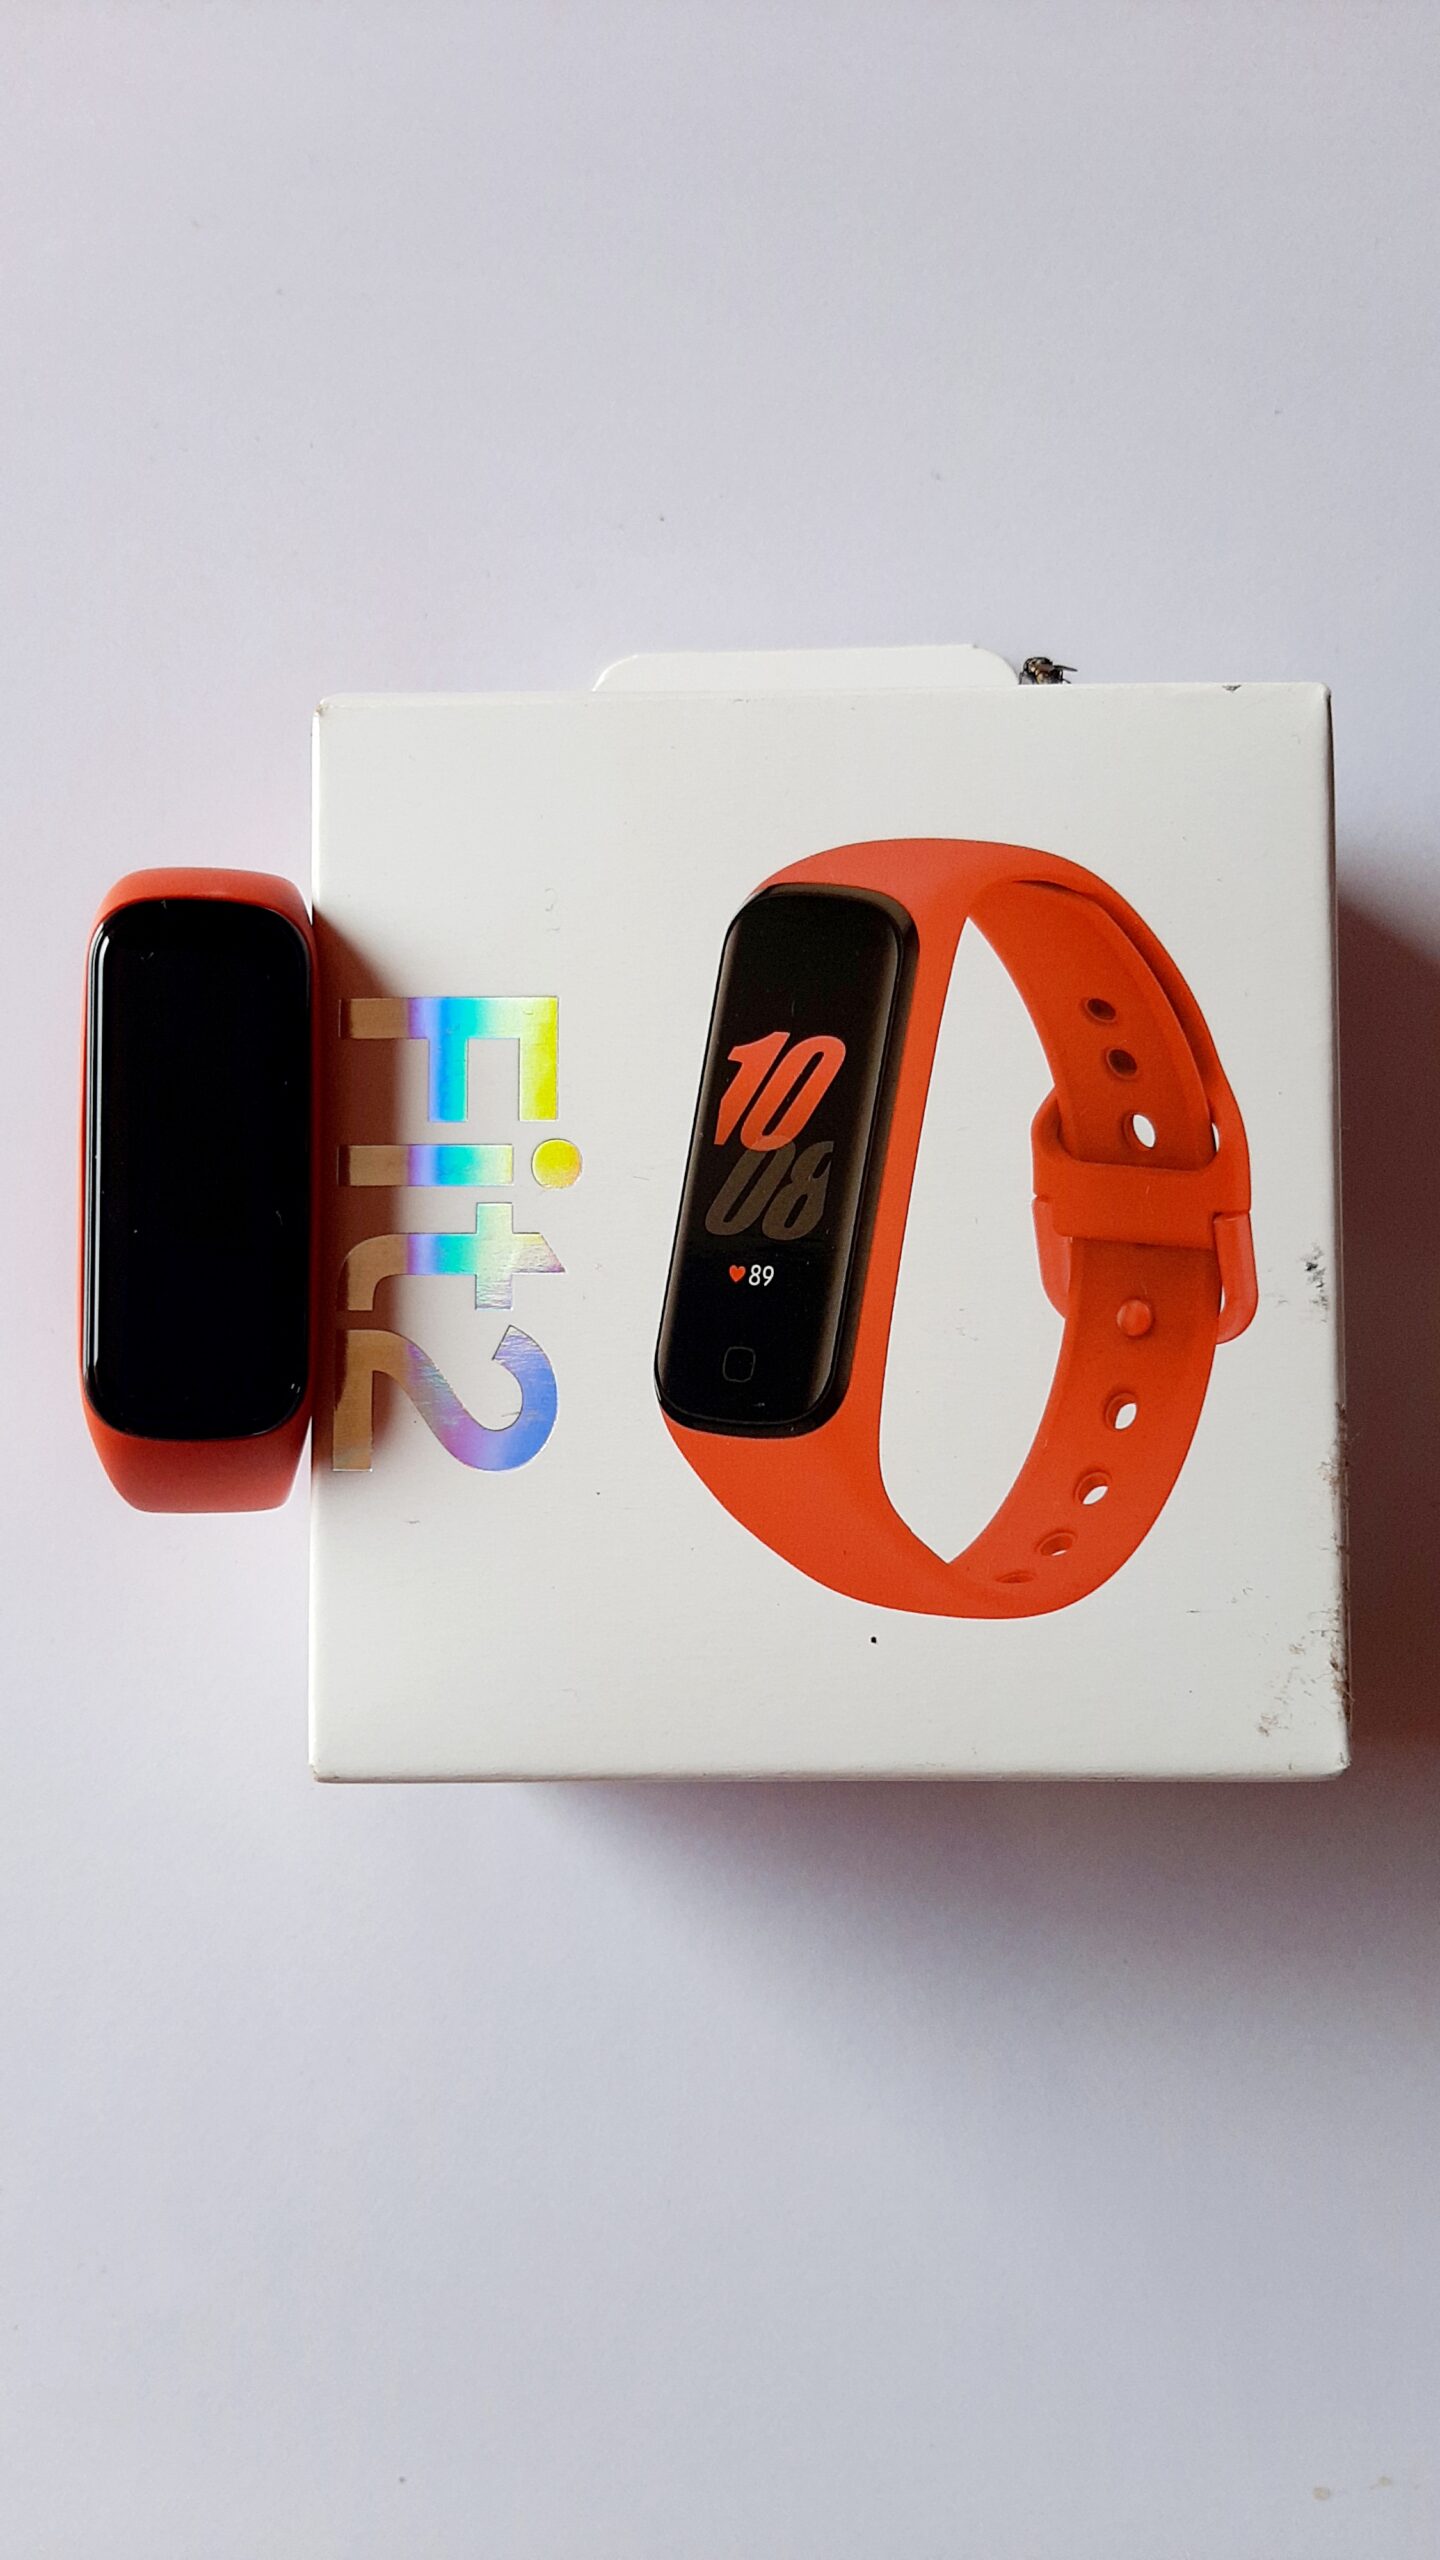 Samsung Galaxy Fit 2 - Complete Setup and Walkthrough